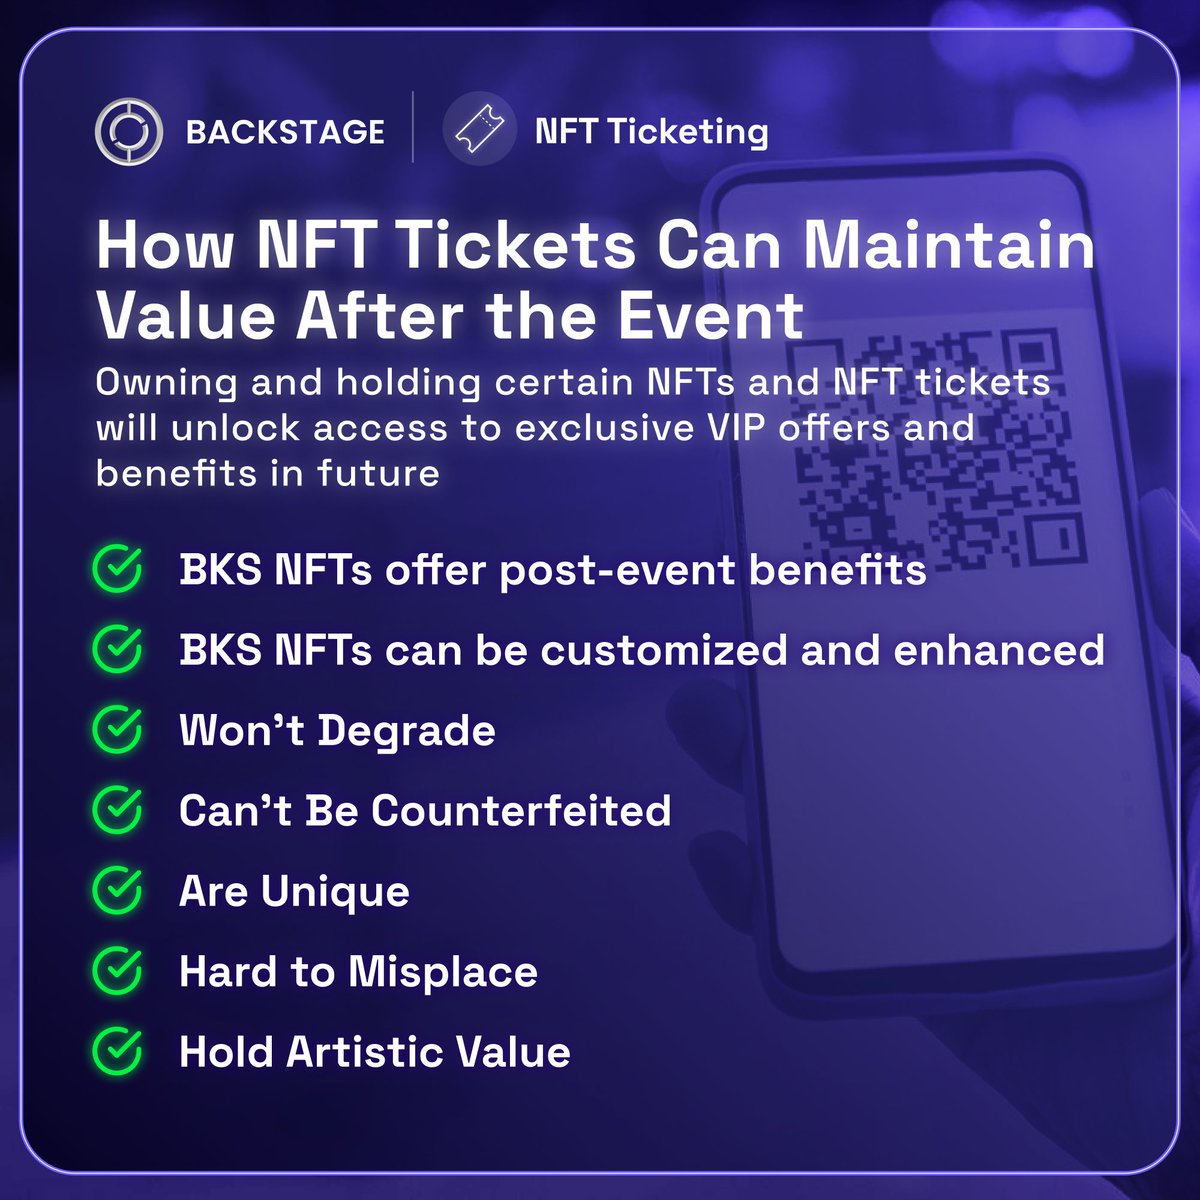 Receive your rewards and benefits automatically by owning Backstage #SmartTicket 🎁 The fun never ends!